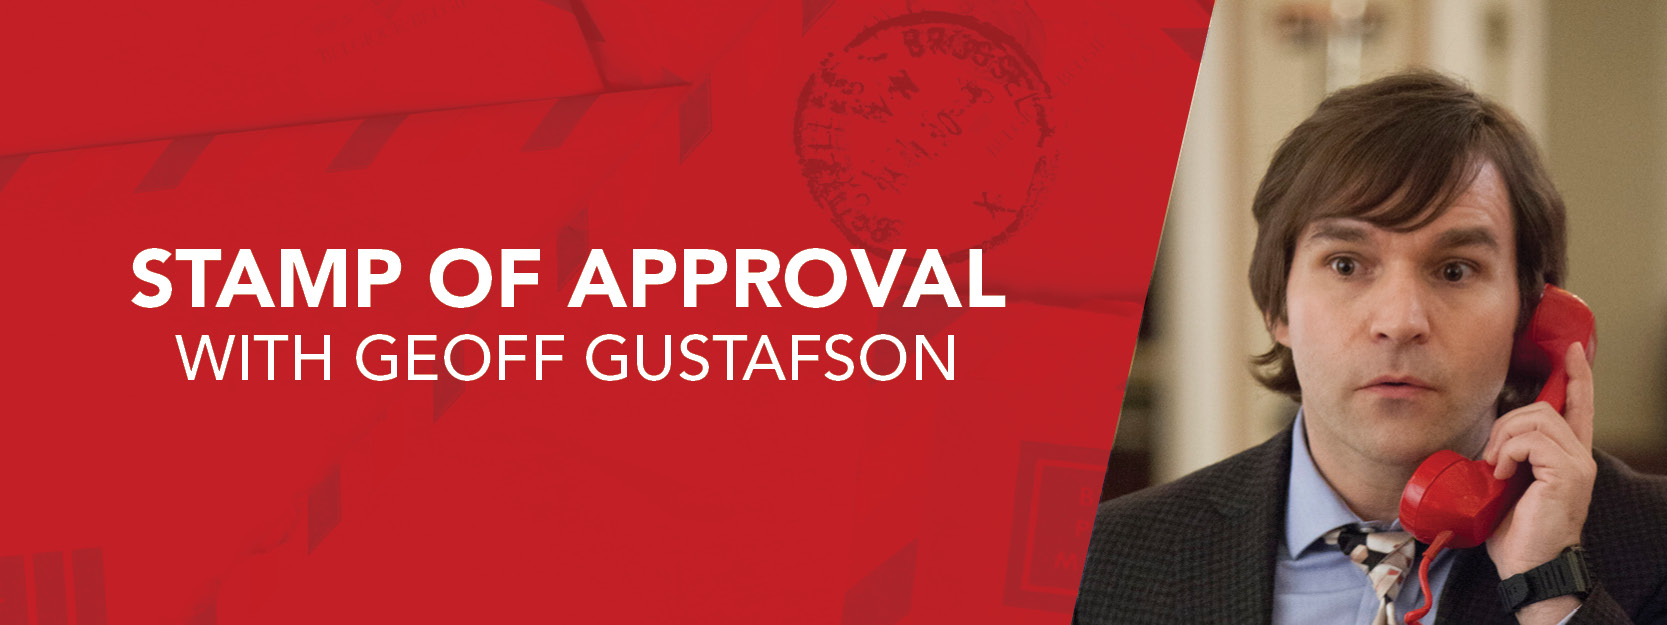 Stamp of Approval with Geoff Gustafson